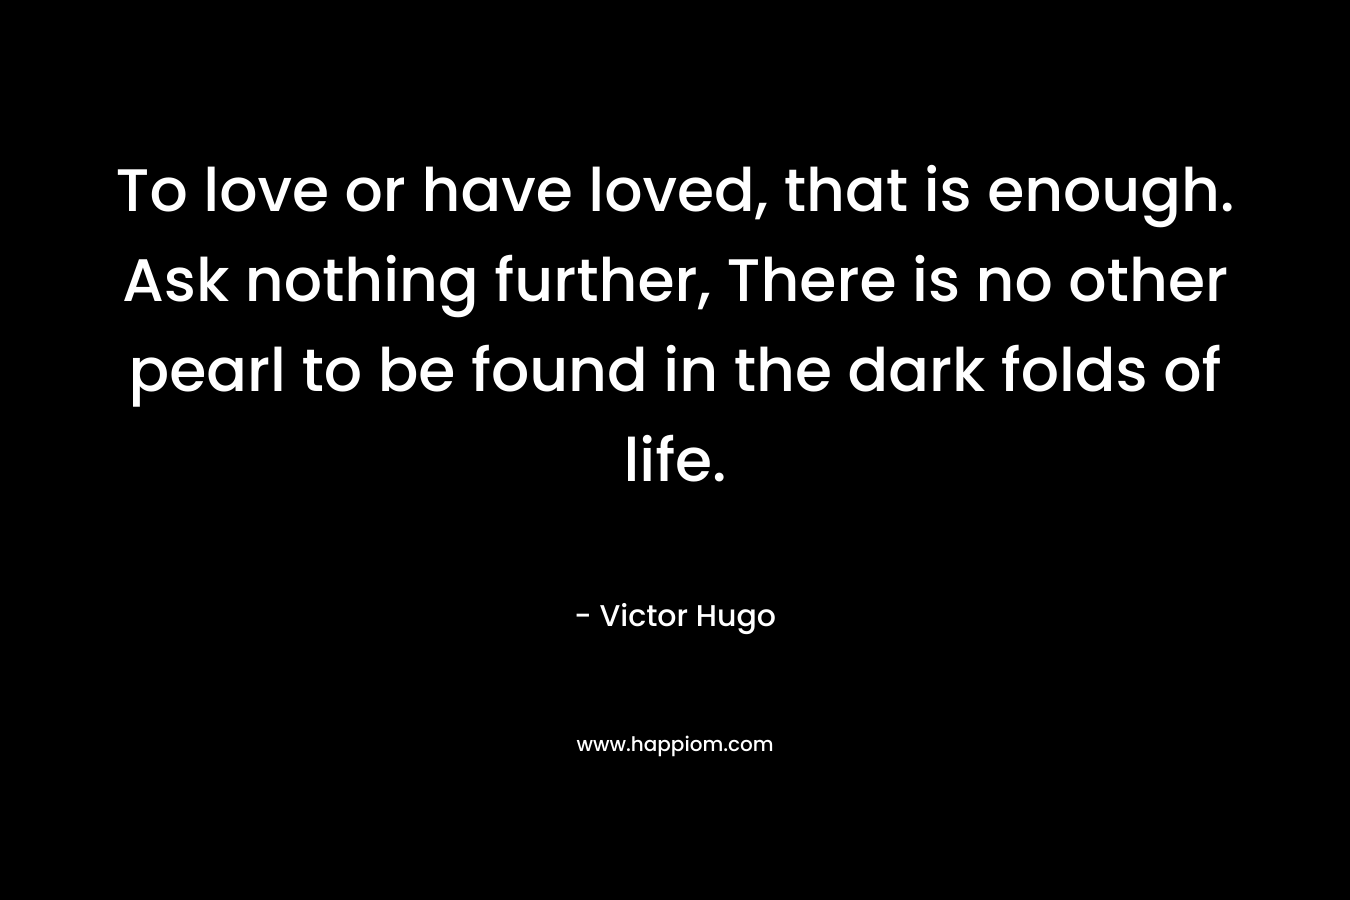 To love or have loved, that is enough. Ask nothing further, There is no other pearl to be found in the dark folds of life.